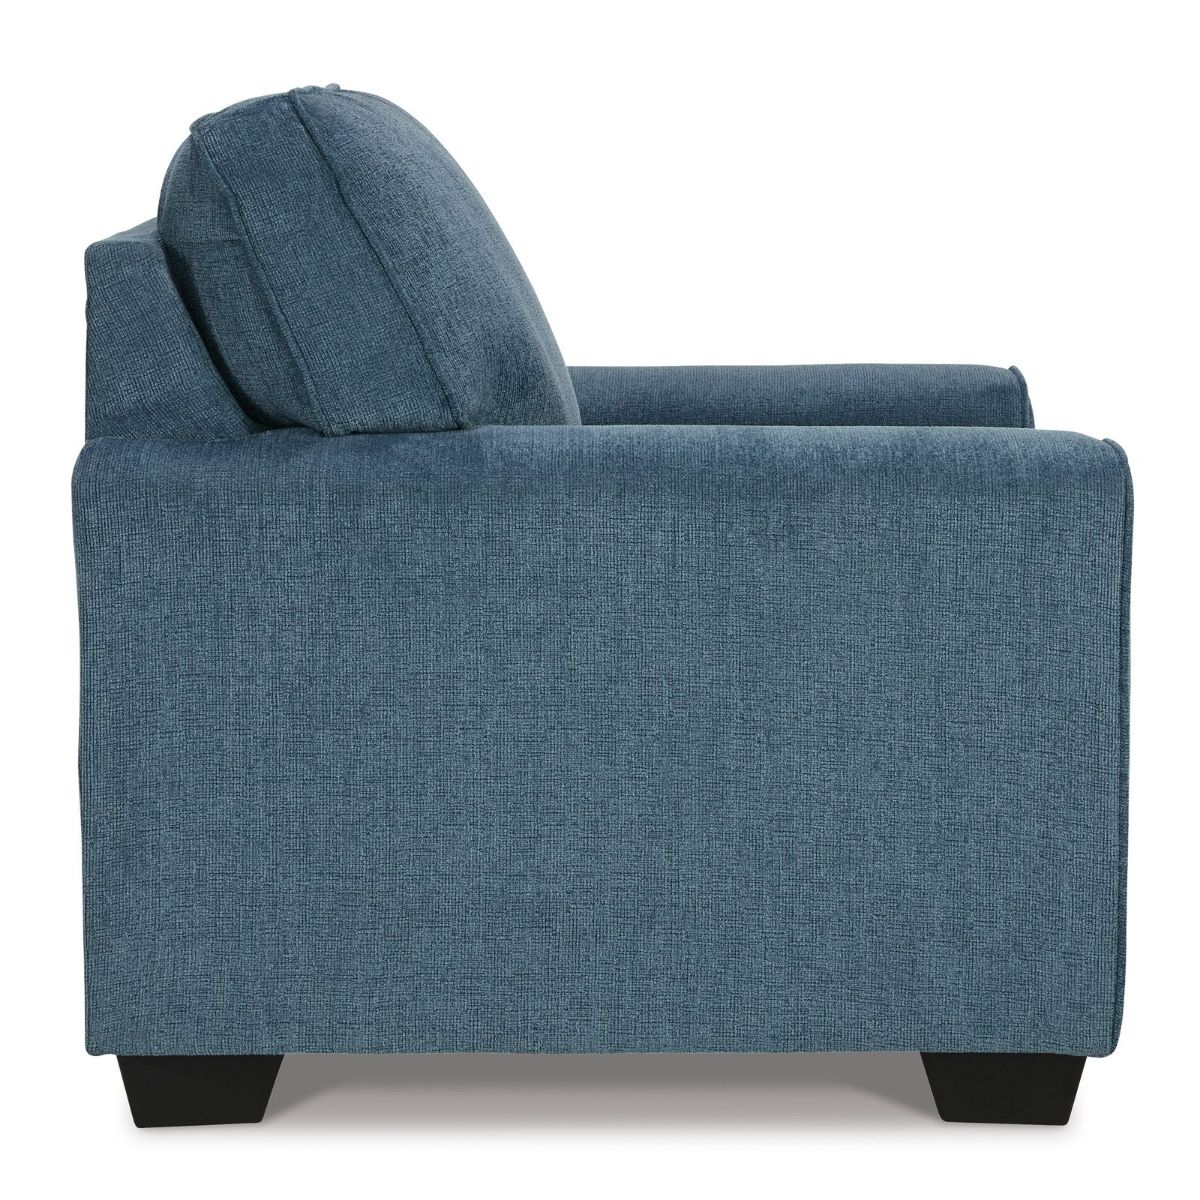 Picture of Cashton Blue Stationary Chair